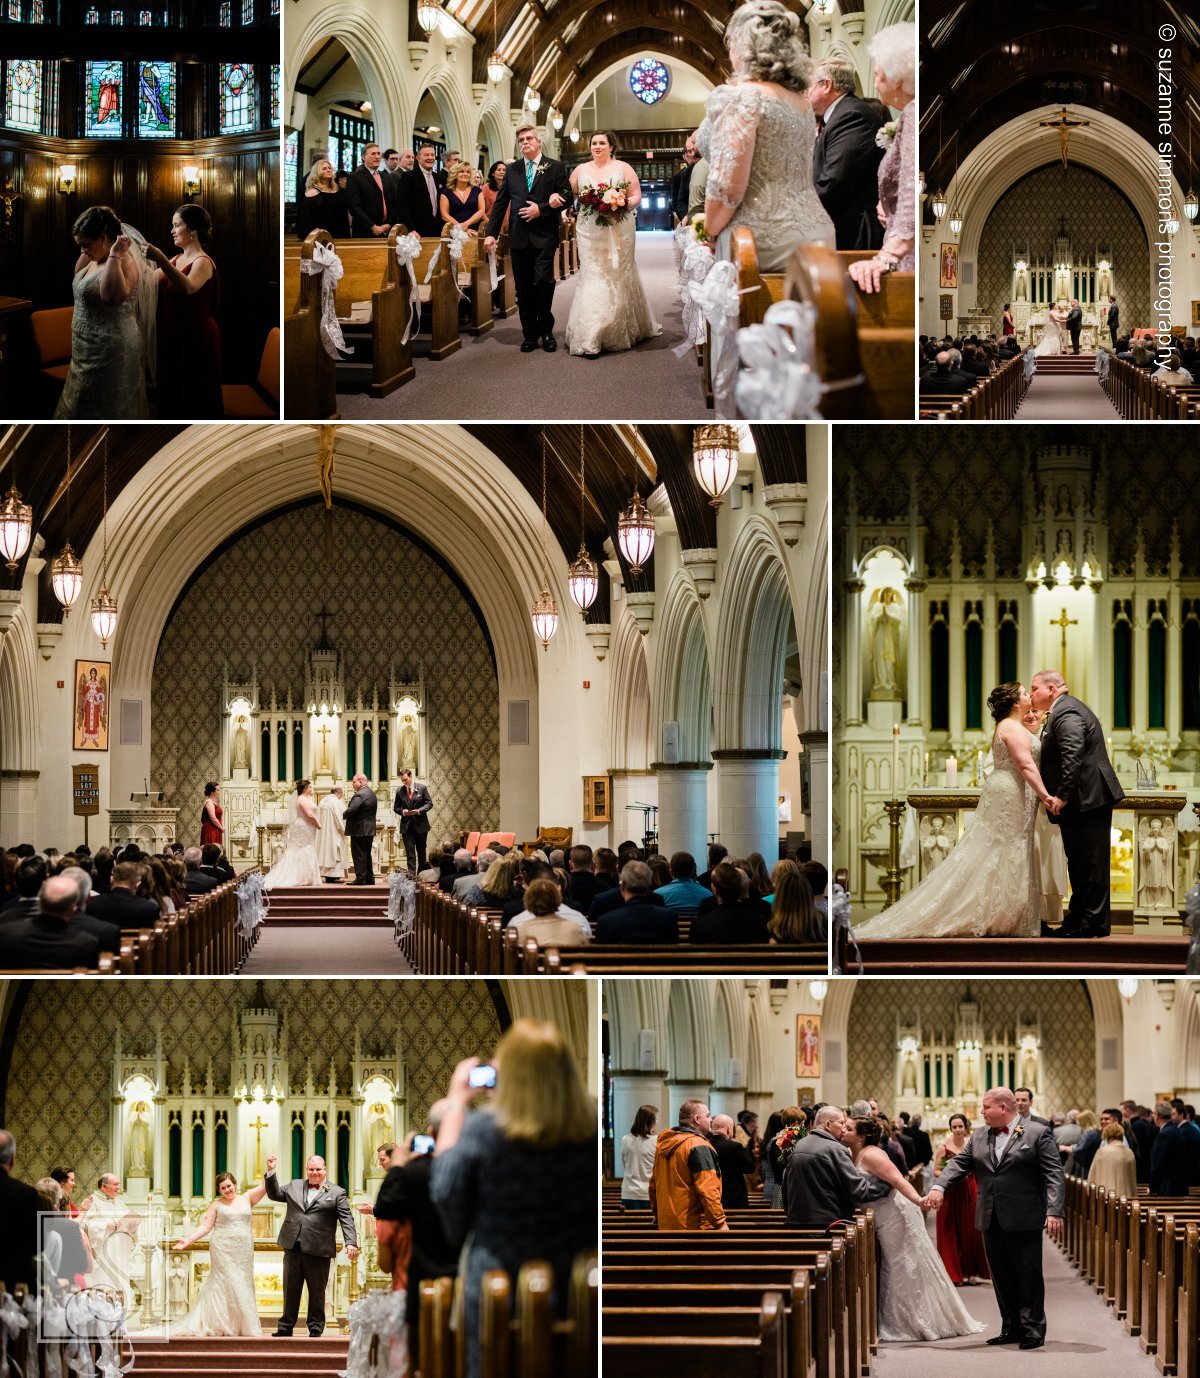 Wedding ceremony at St. Mary of the Assumption Church